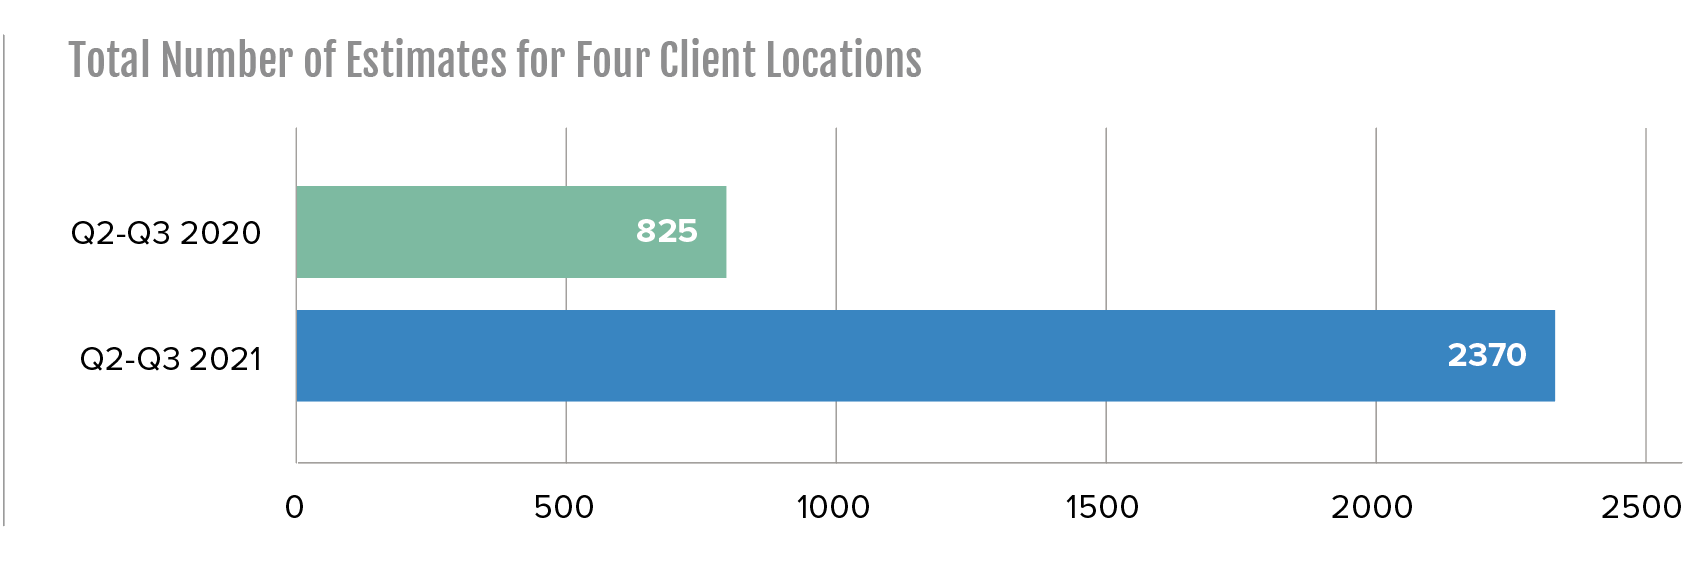 total number of estimates for four client locations